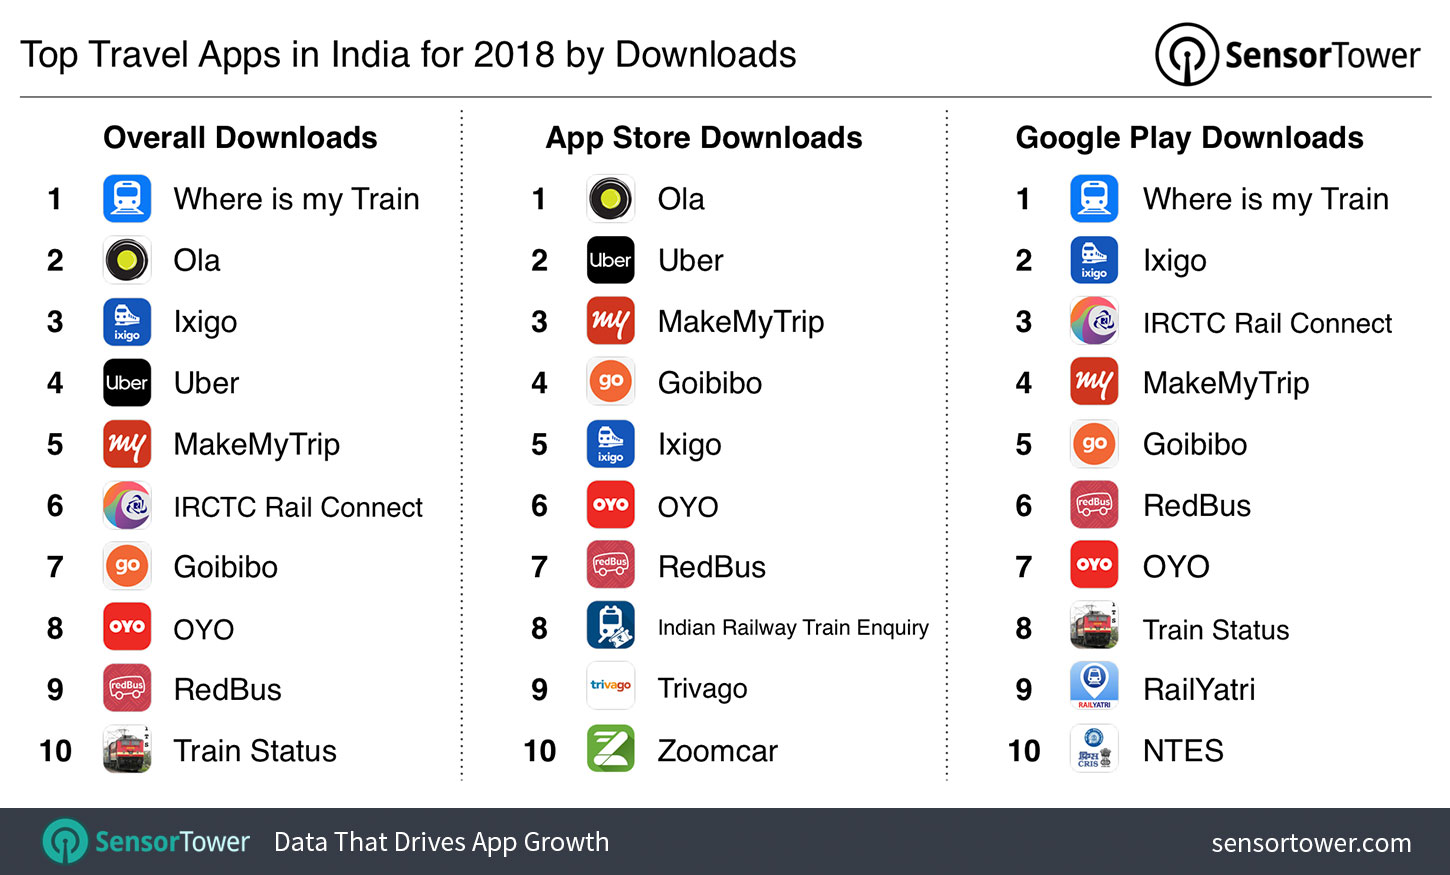 Top Travel Apps in India for 2018 by Downloads